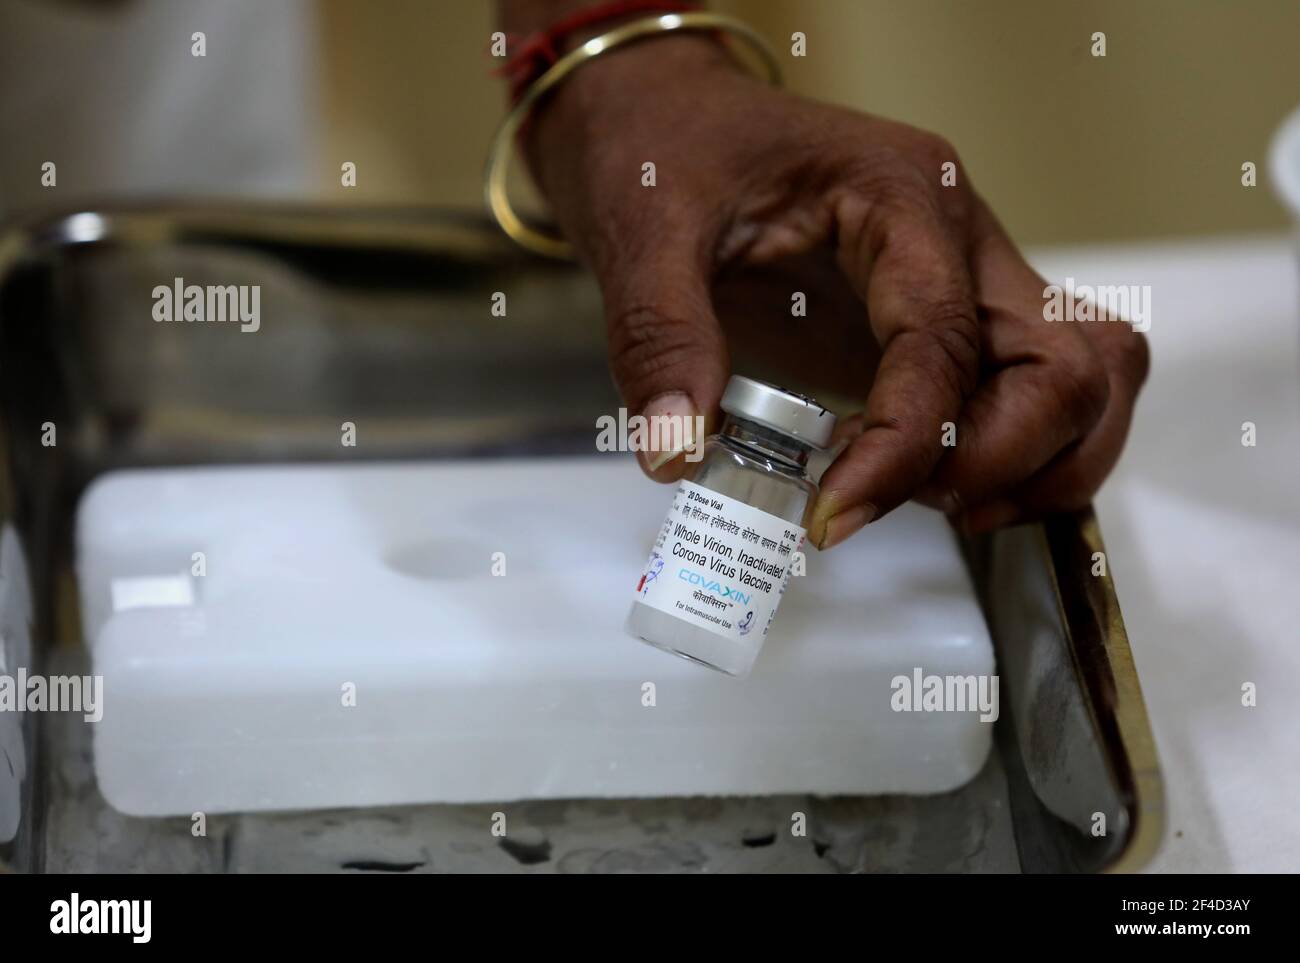 A health worker hold a vial of COVAXIN Covid-19 vaccine developed by Bharat Biotech at a government dispensary during the countrywide vaccination drive.Vaccination drive has been initiated to cover citizen above 60 years and above 45 years of age suffering from comorbid conditions. Stock Photo